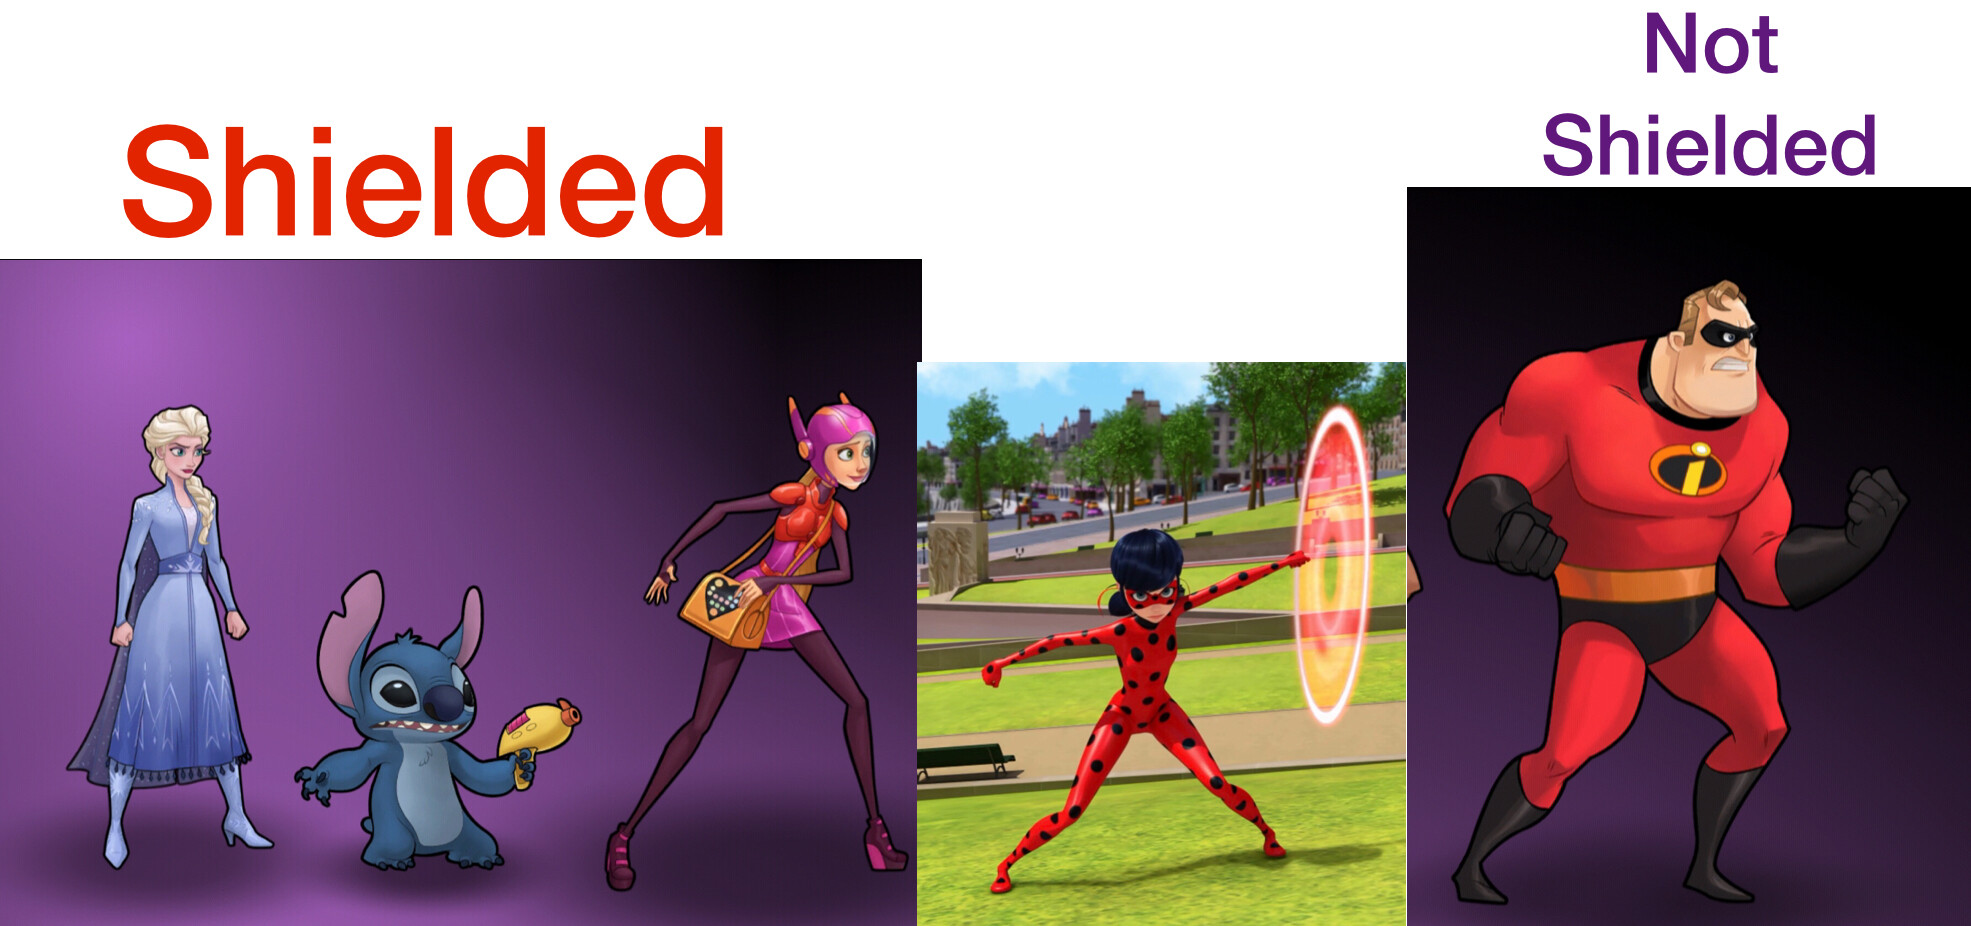 Endless. world's most unlikely concept - Hero Concepts - Disney Heroes:  Battle Mode